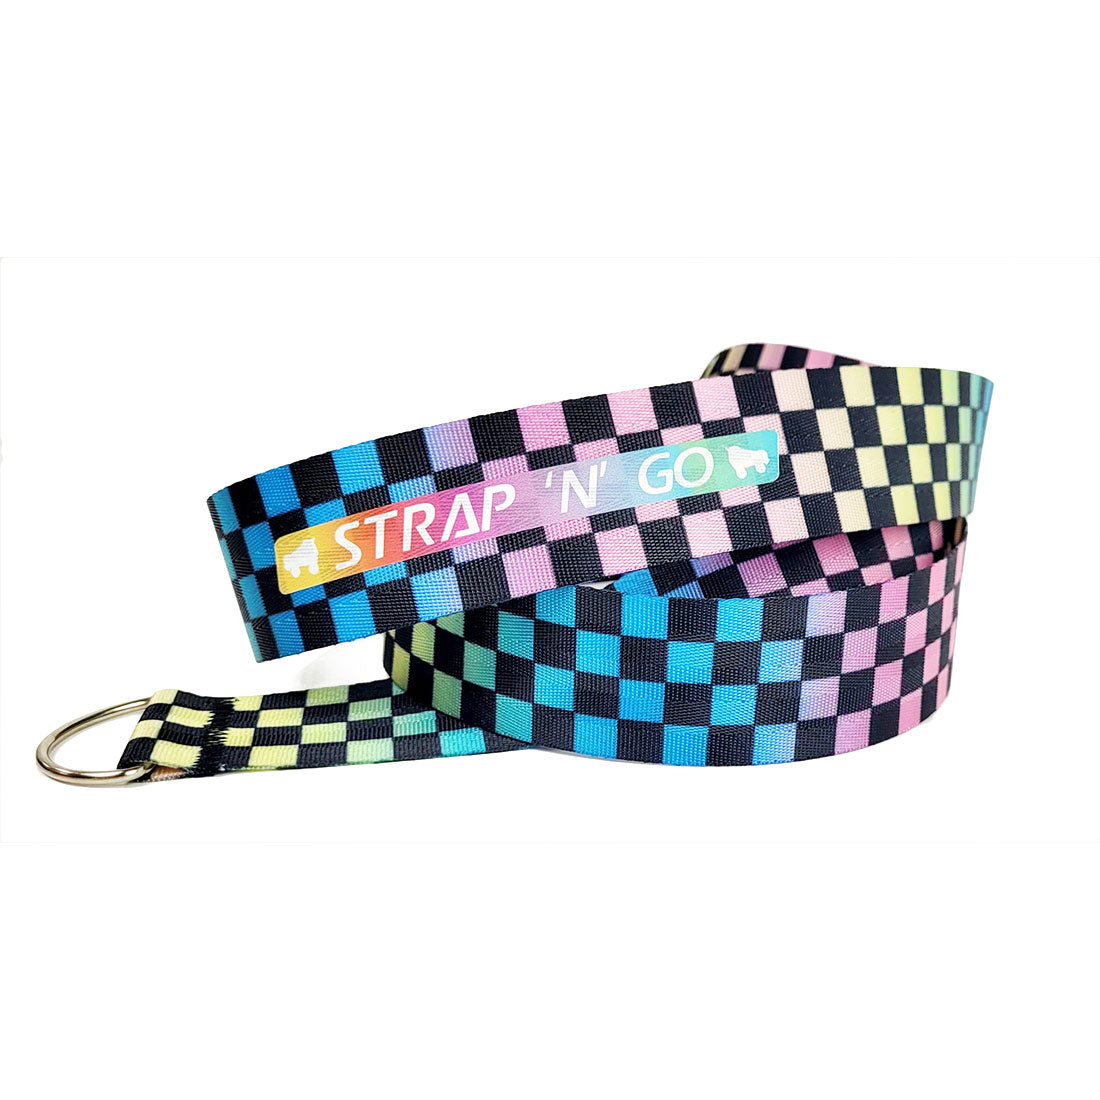 Strap N Go Skate Noose/Leash - Patterns Rainbow Checkers Roller Skate Accessories